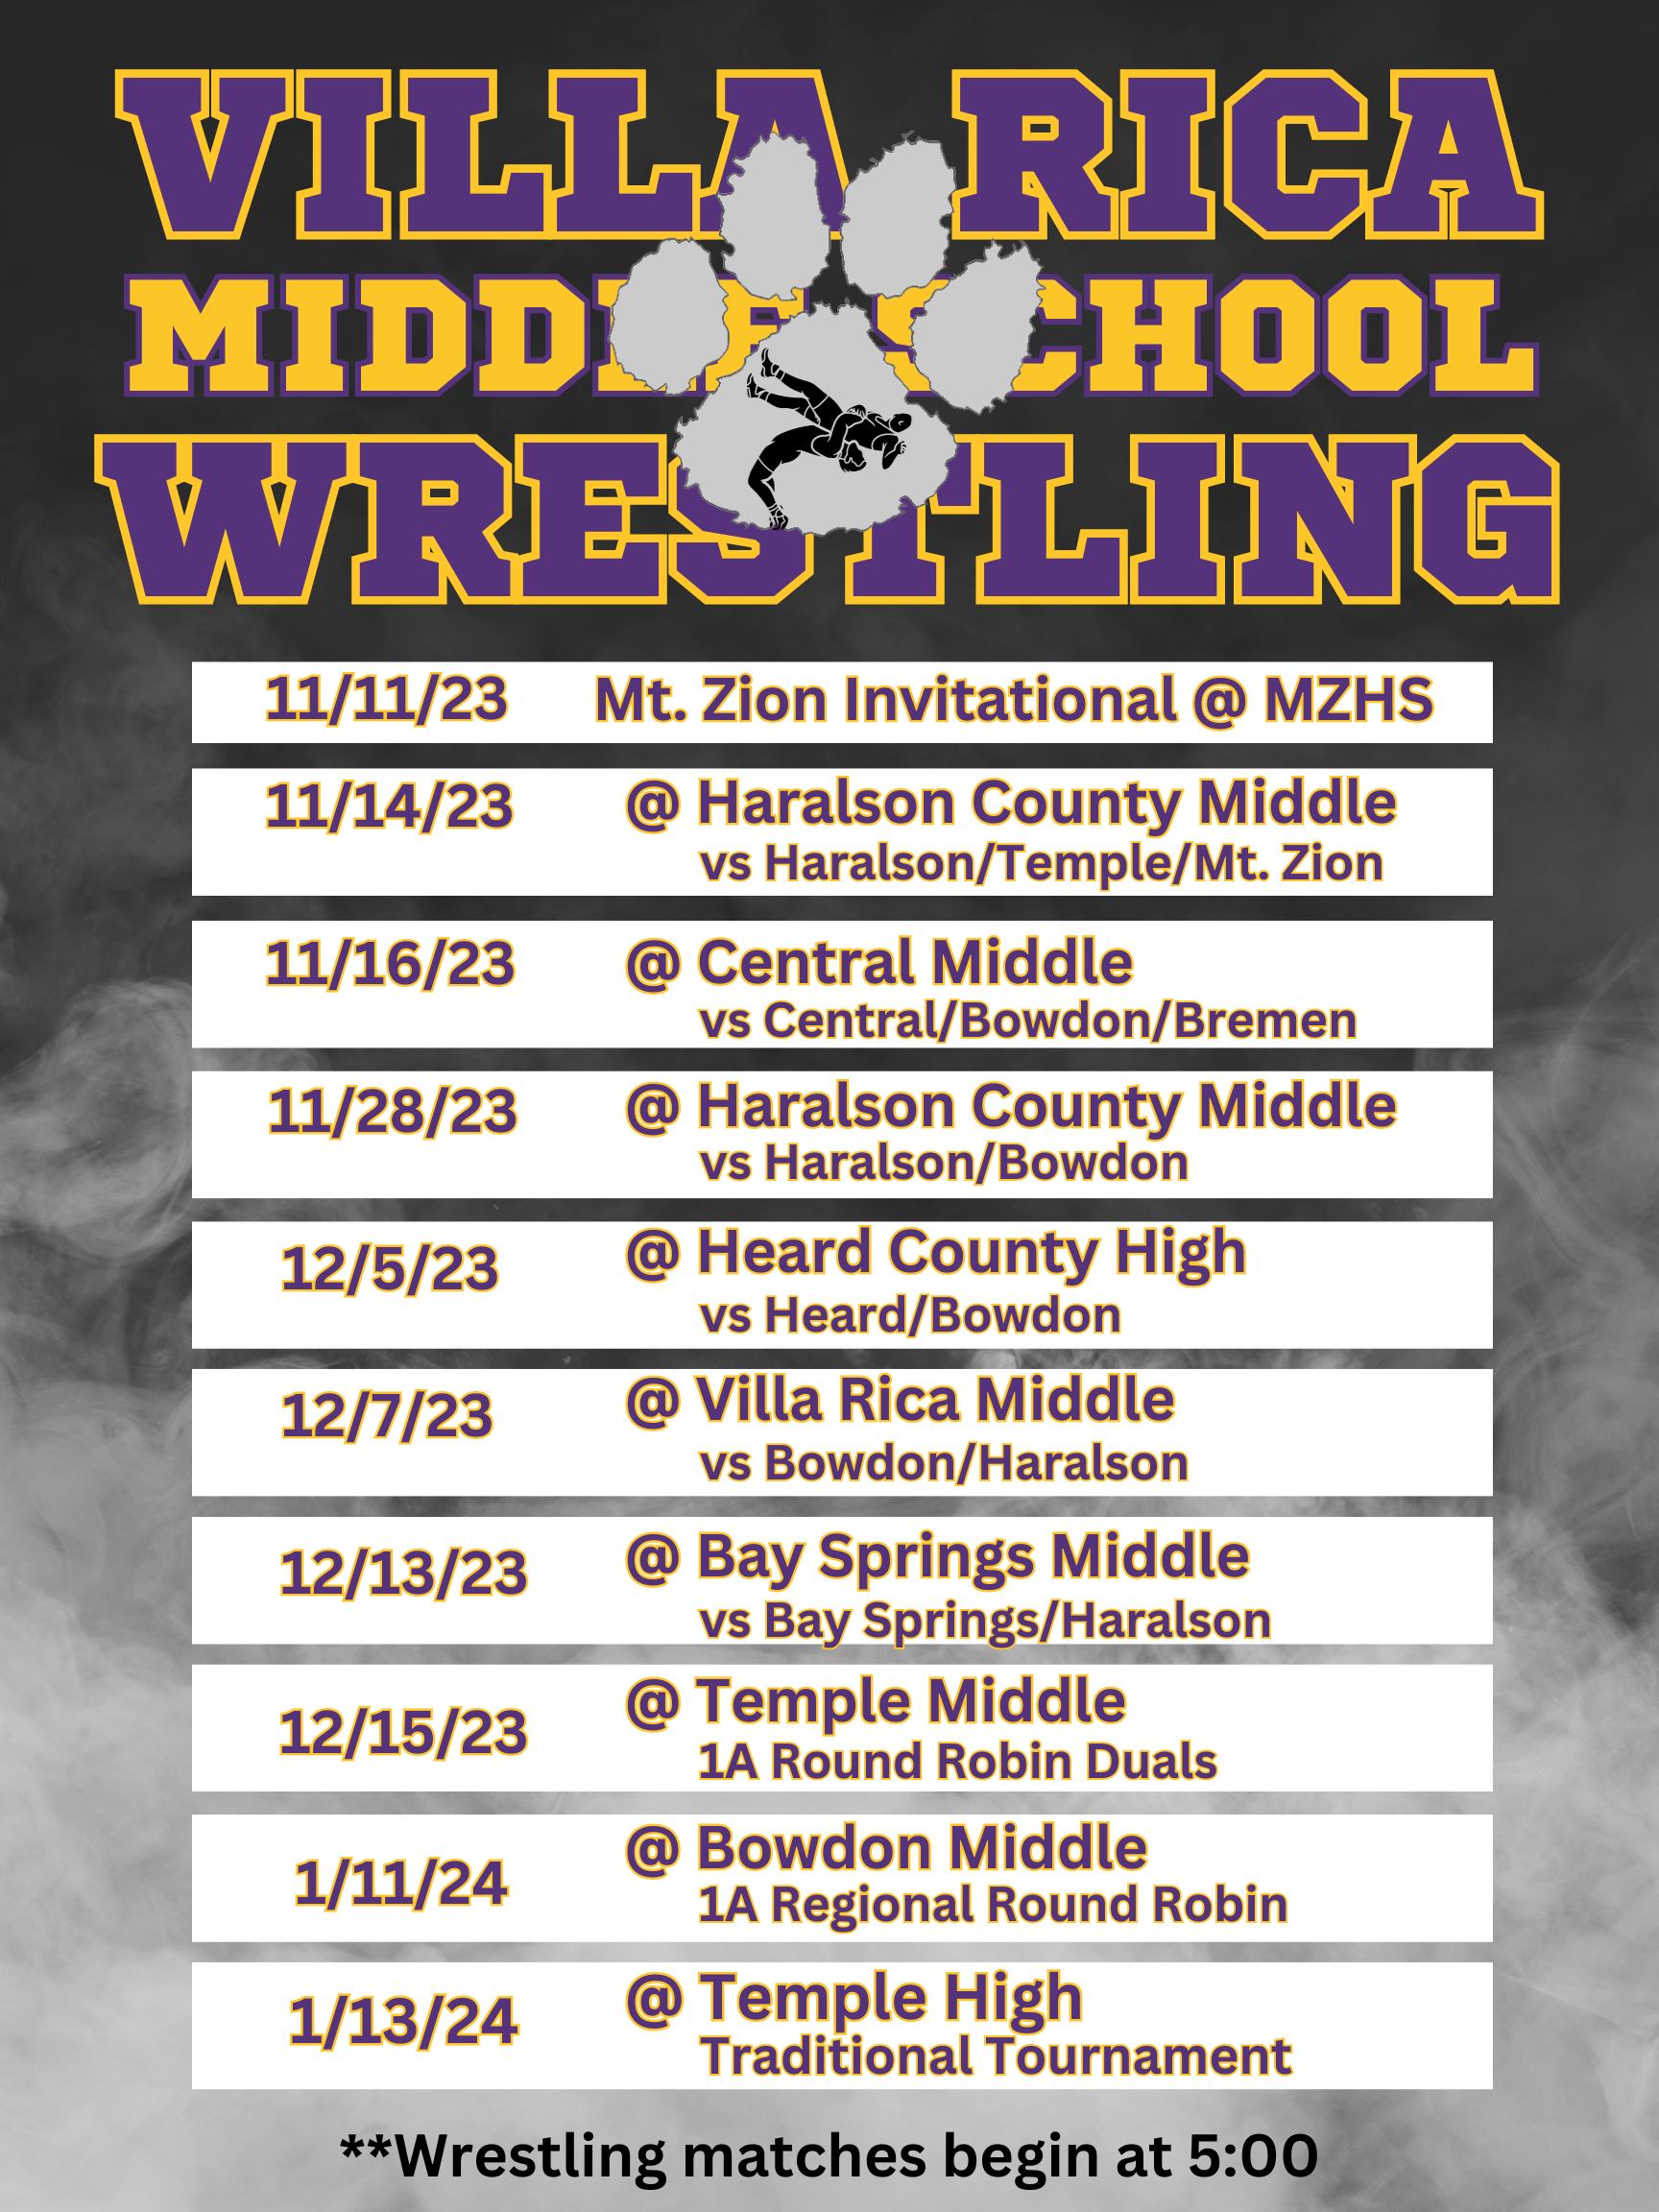 May be an image of text that says '11/16/23 11/28/23 VILLA RICA MIDDI CHOOL WRESTLING TLING 11/11/23 Mt. Zion Invitational @ MZHS 11/14/23 Haralson County Middle vs Haralson/Tempe/Mt. Zion Central Middle vs Central/Bowdon/Bremen Haralson County Middle vs Haralson/Bowdon Heard County High vs Heard/Bowdon Villa Rica Middle vs Bowdon/Haralson Bay Springs Middle vs Bay Springs/Haralson Haralson Temple Middle 1A Round Robin Duals 12/5/23 12/7/23 12/13/23 12/15/23 1/11/24 1/13/24 Bowdon Middle 1A Regional Round Robin Temple High Traditional Tournament **Wrestling matches begin at 5:00'